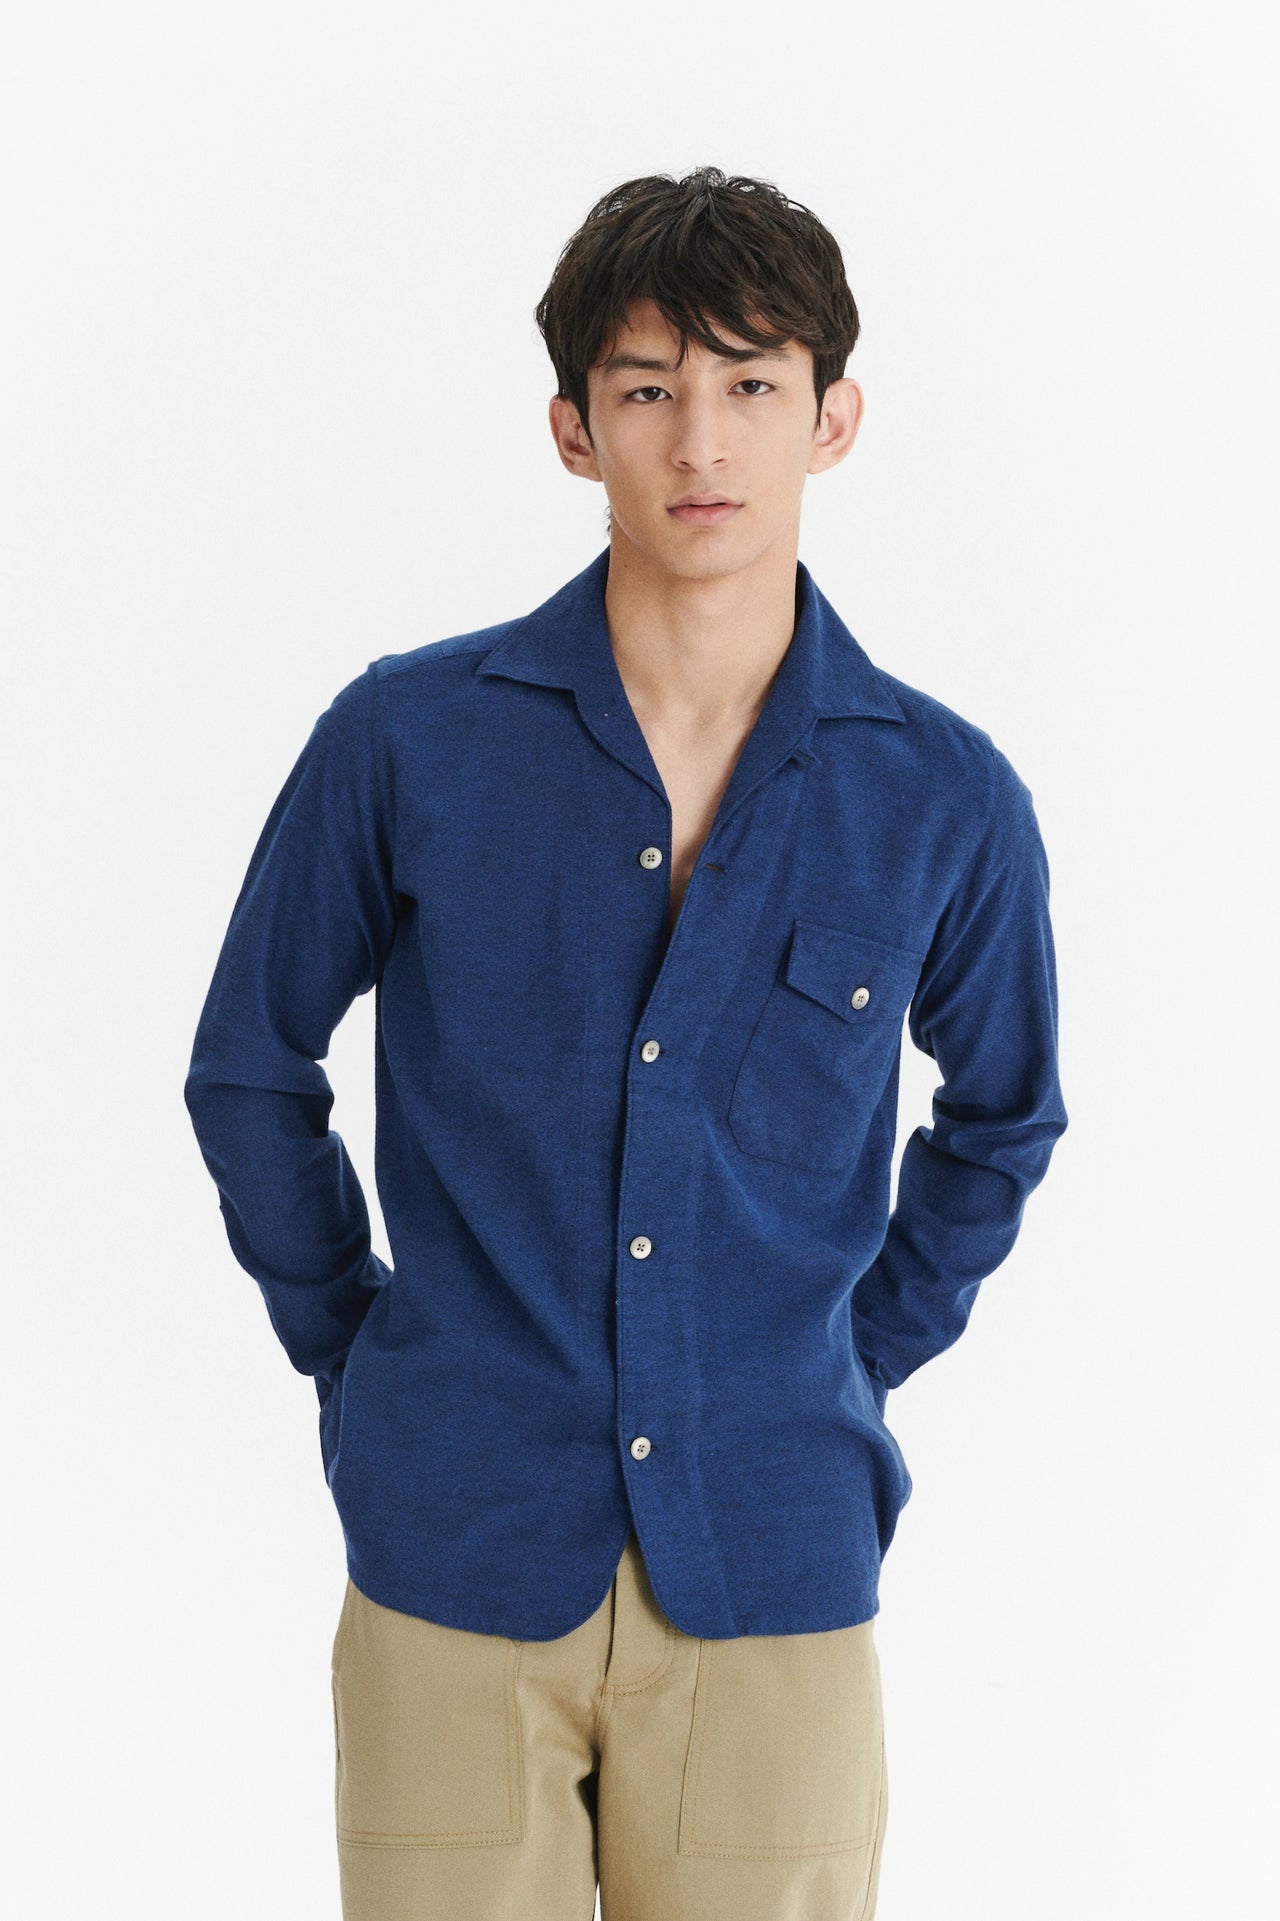 Relaxed Camp Collar Overshirt in a Profound Blue Soft Portuguese Brushed Cotton Flannel